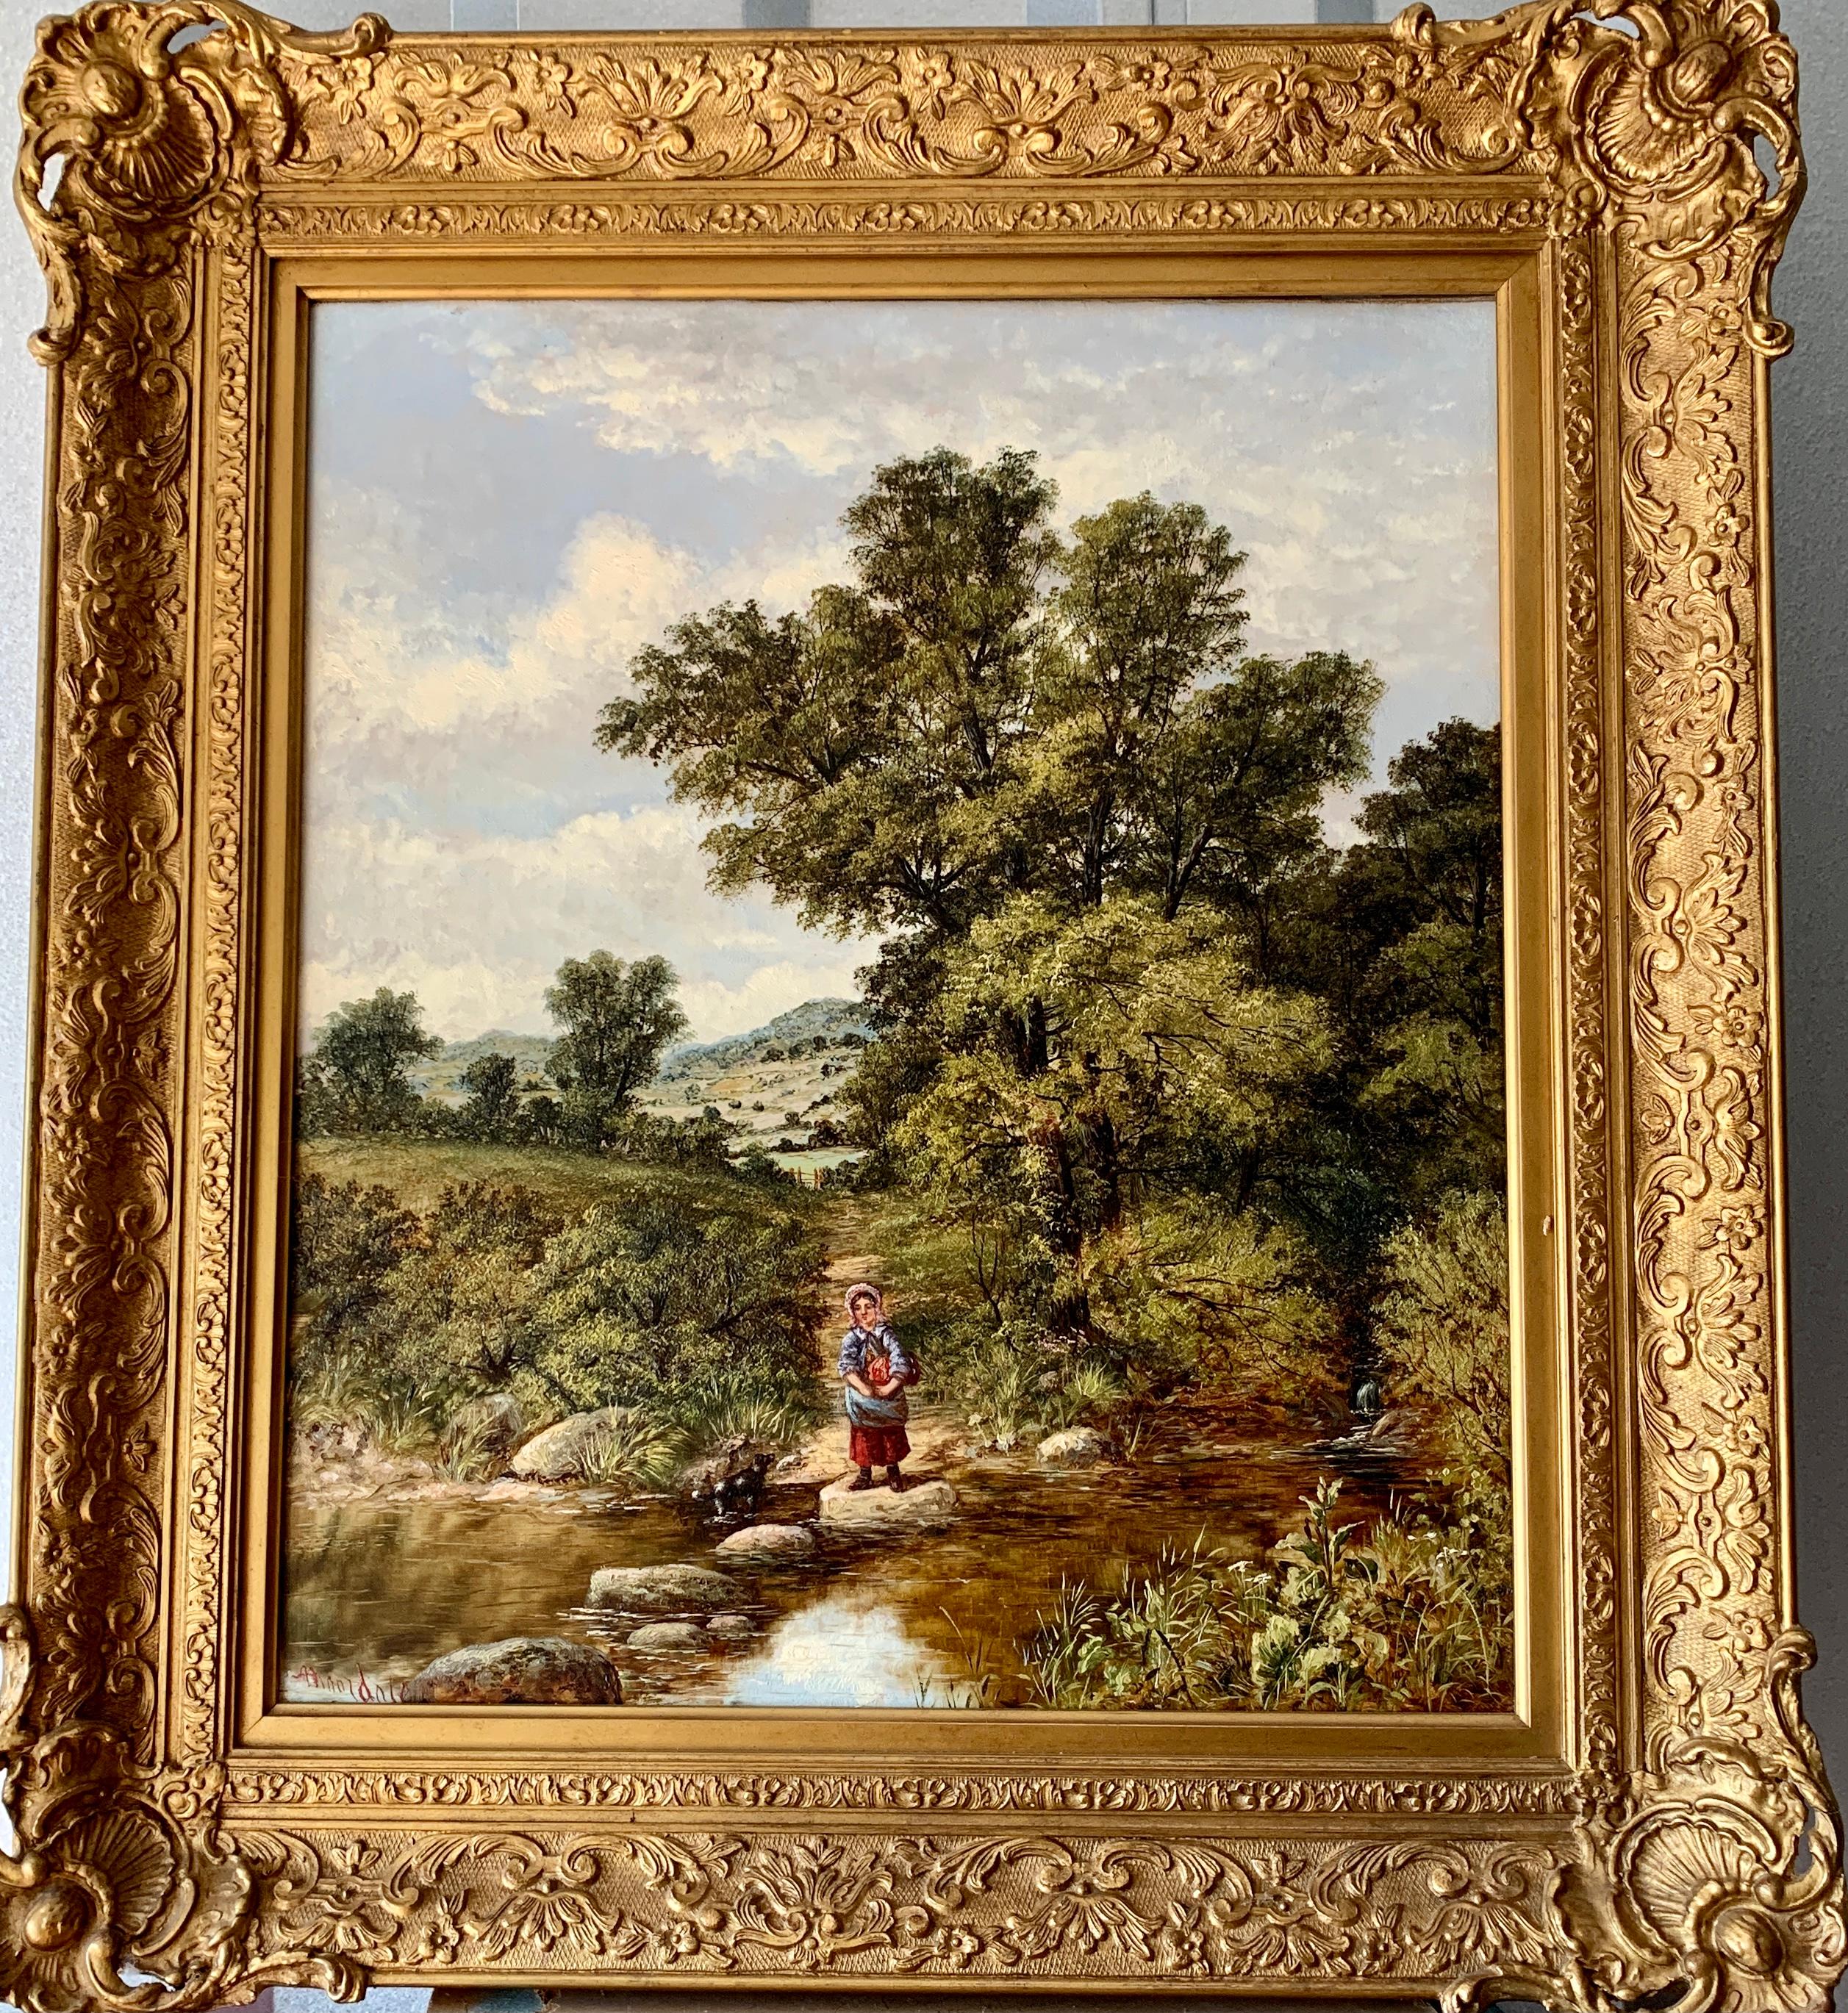 Unknown Landscape Painting - 19th century English landscape with a woman crossing a river on stepping stones